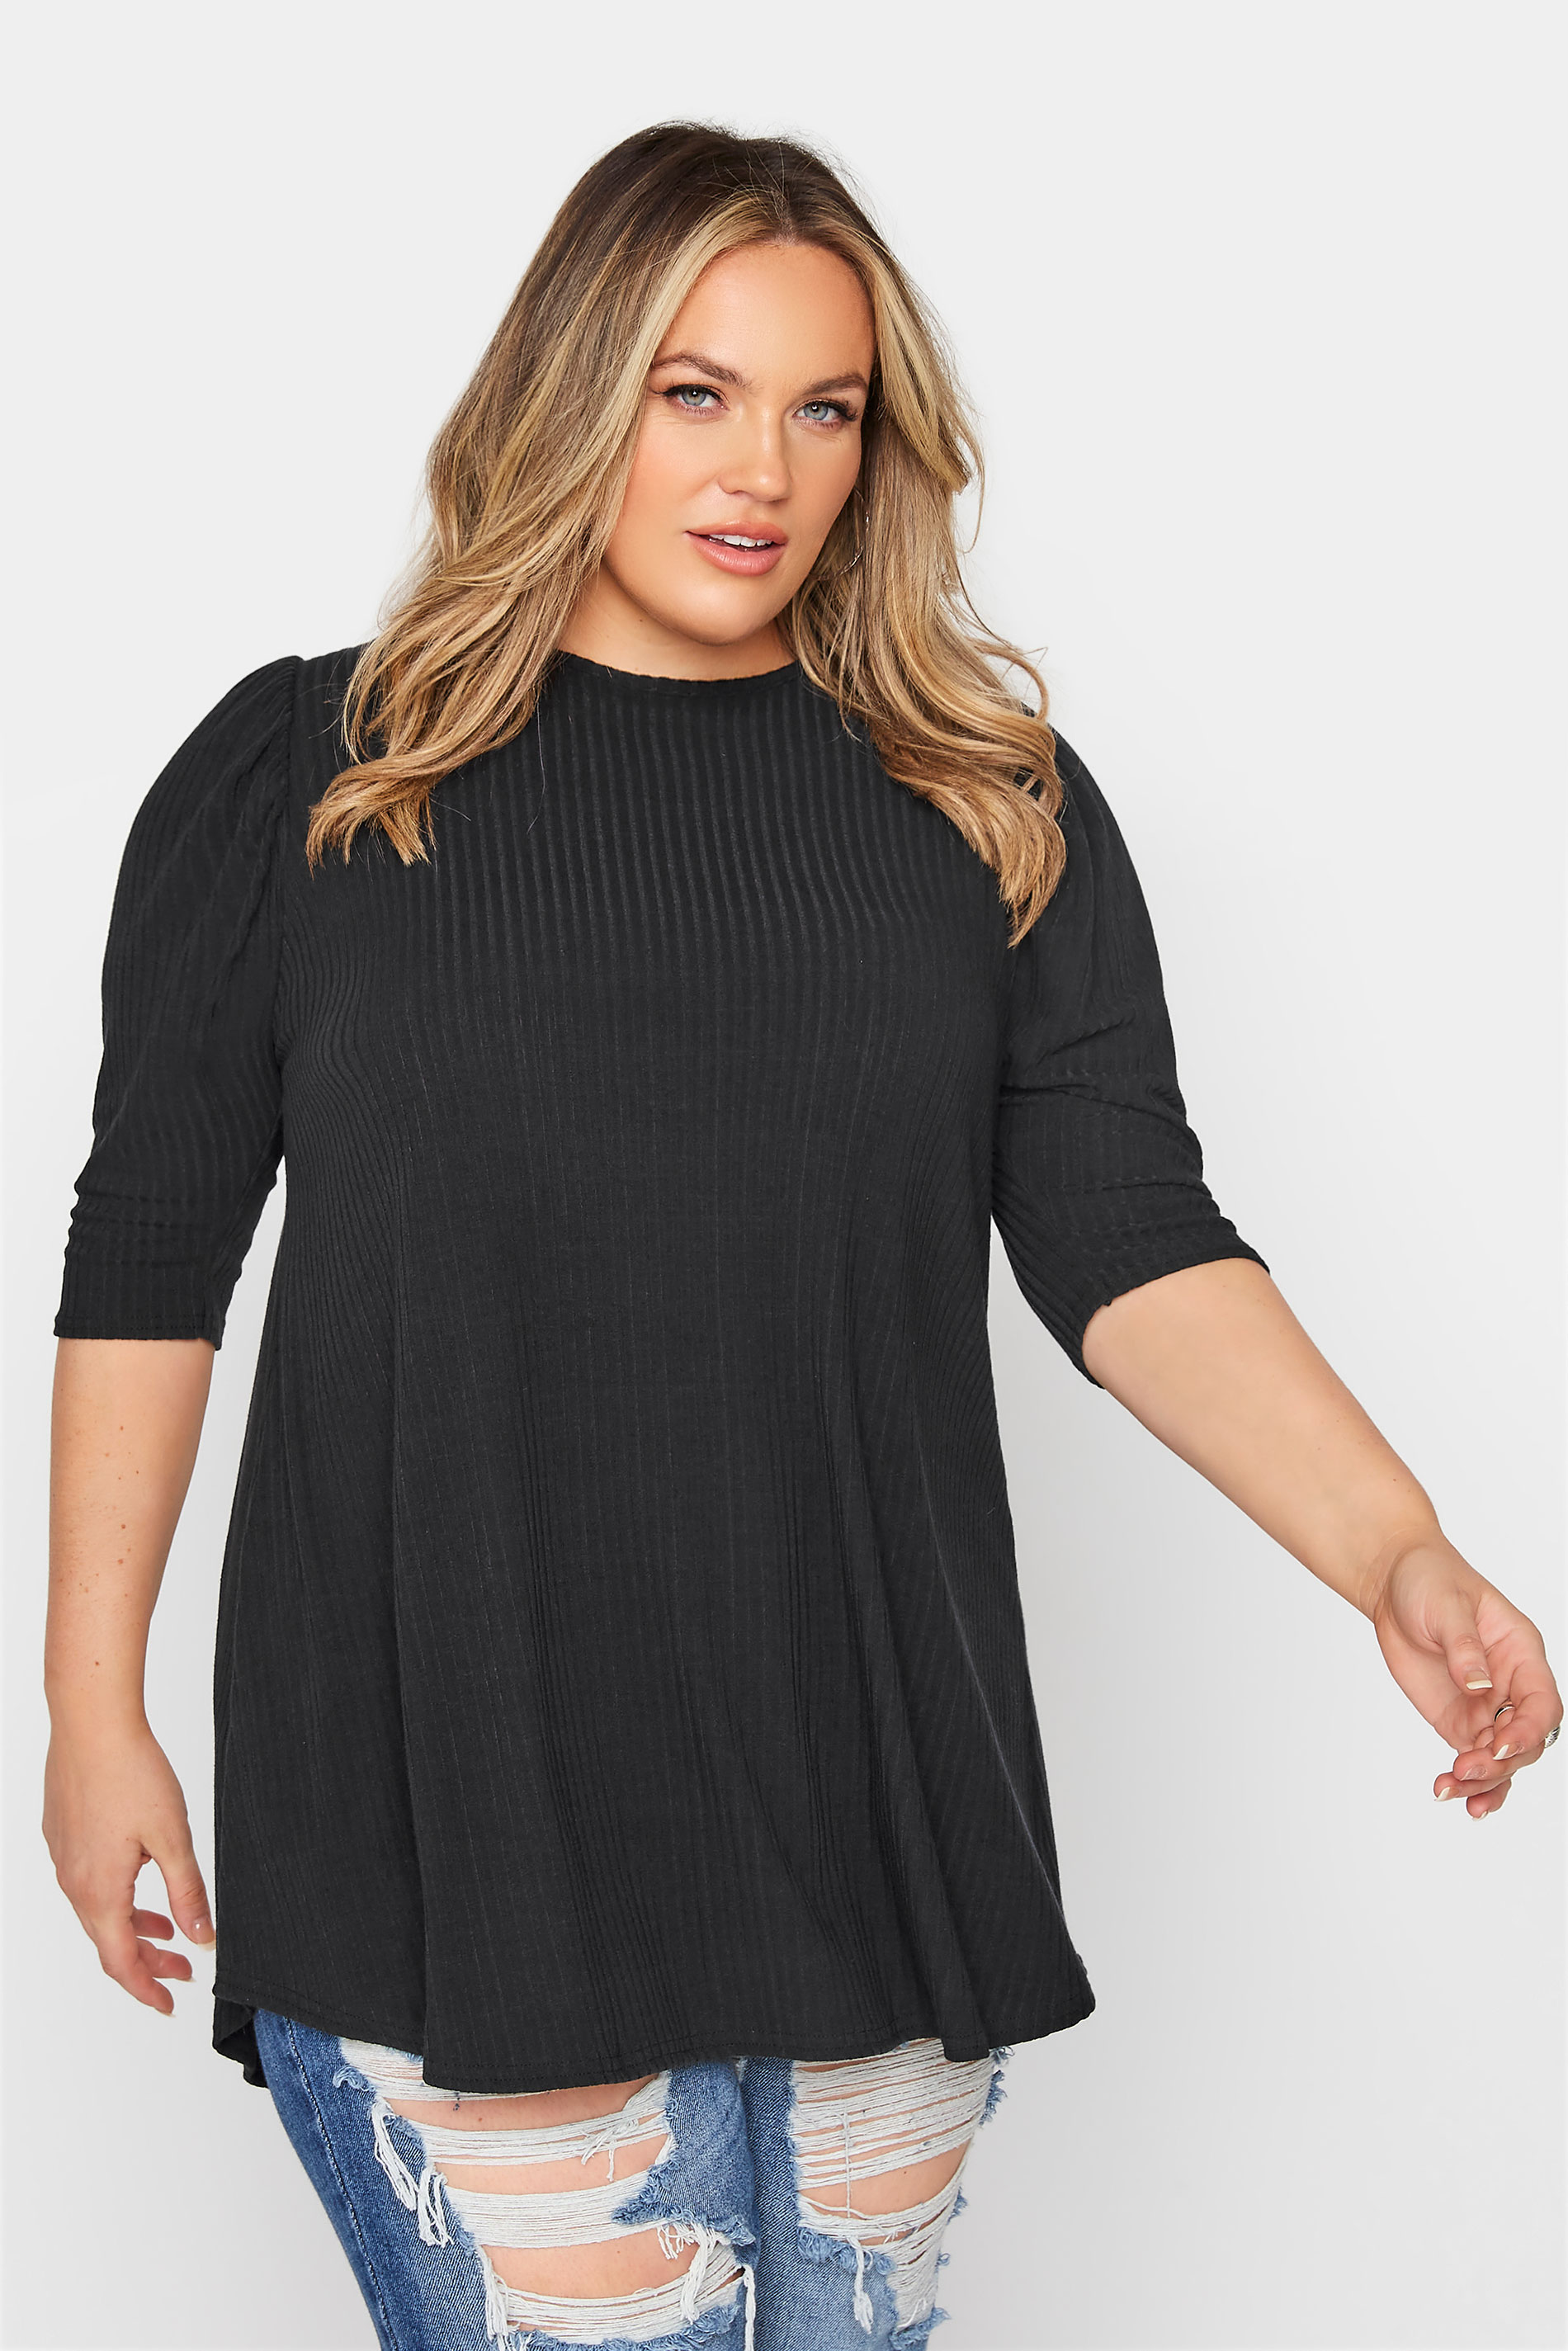 LIMITED COLLECTION Black Puff Sleeve Ribbed Top_A.jpg